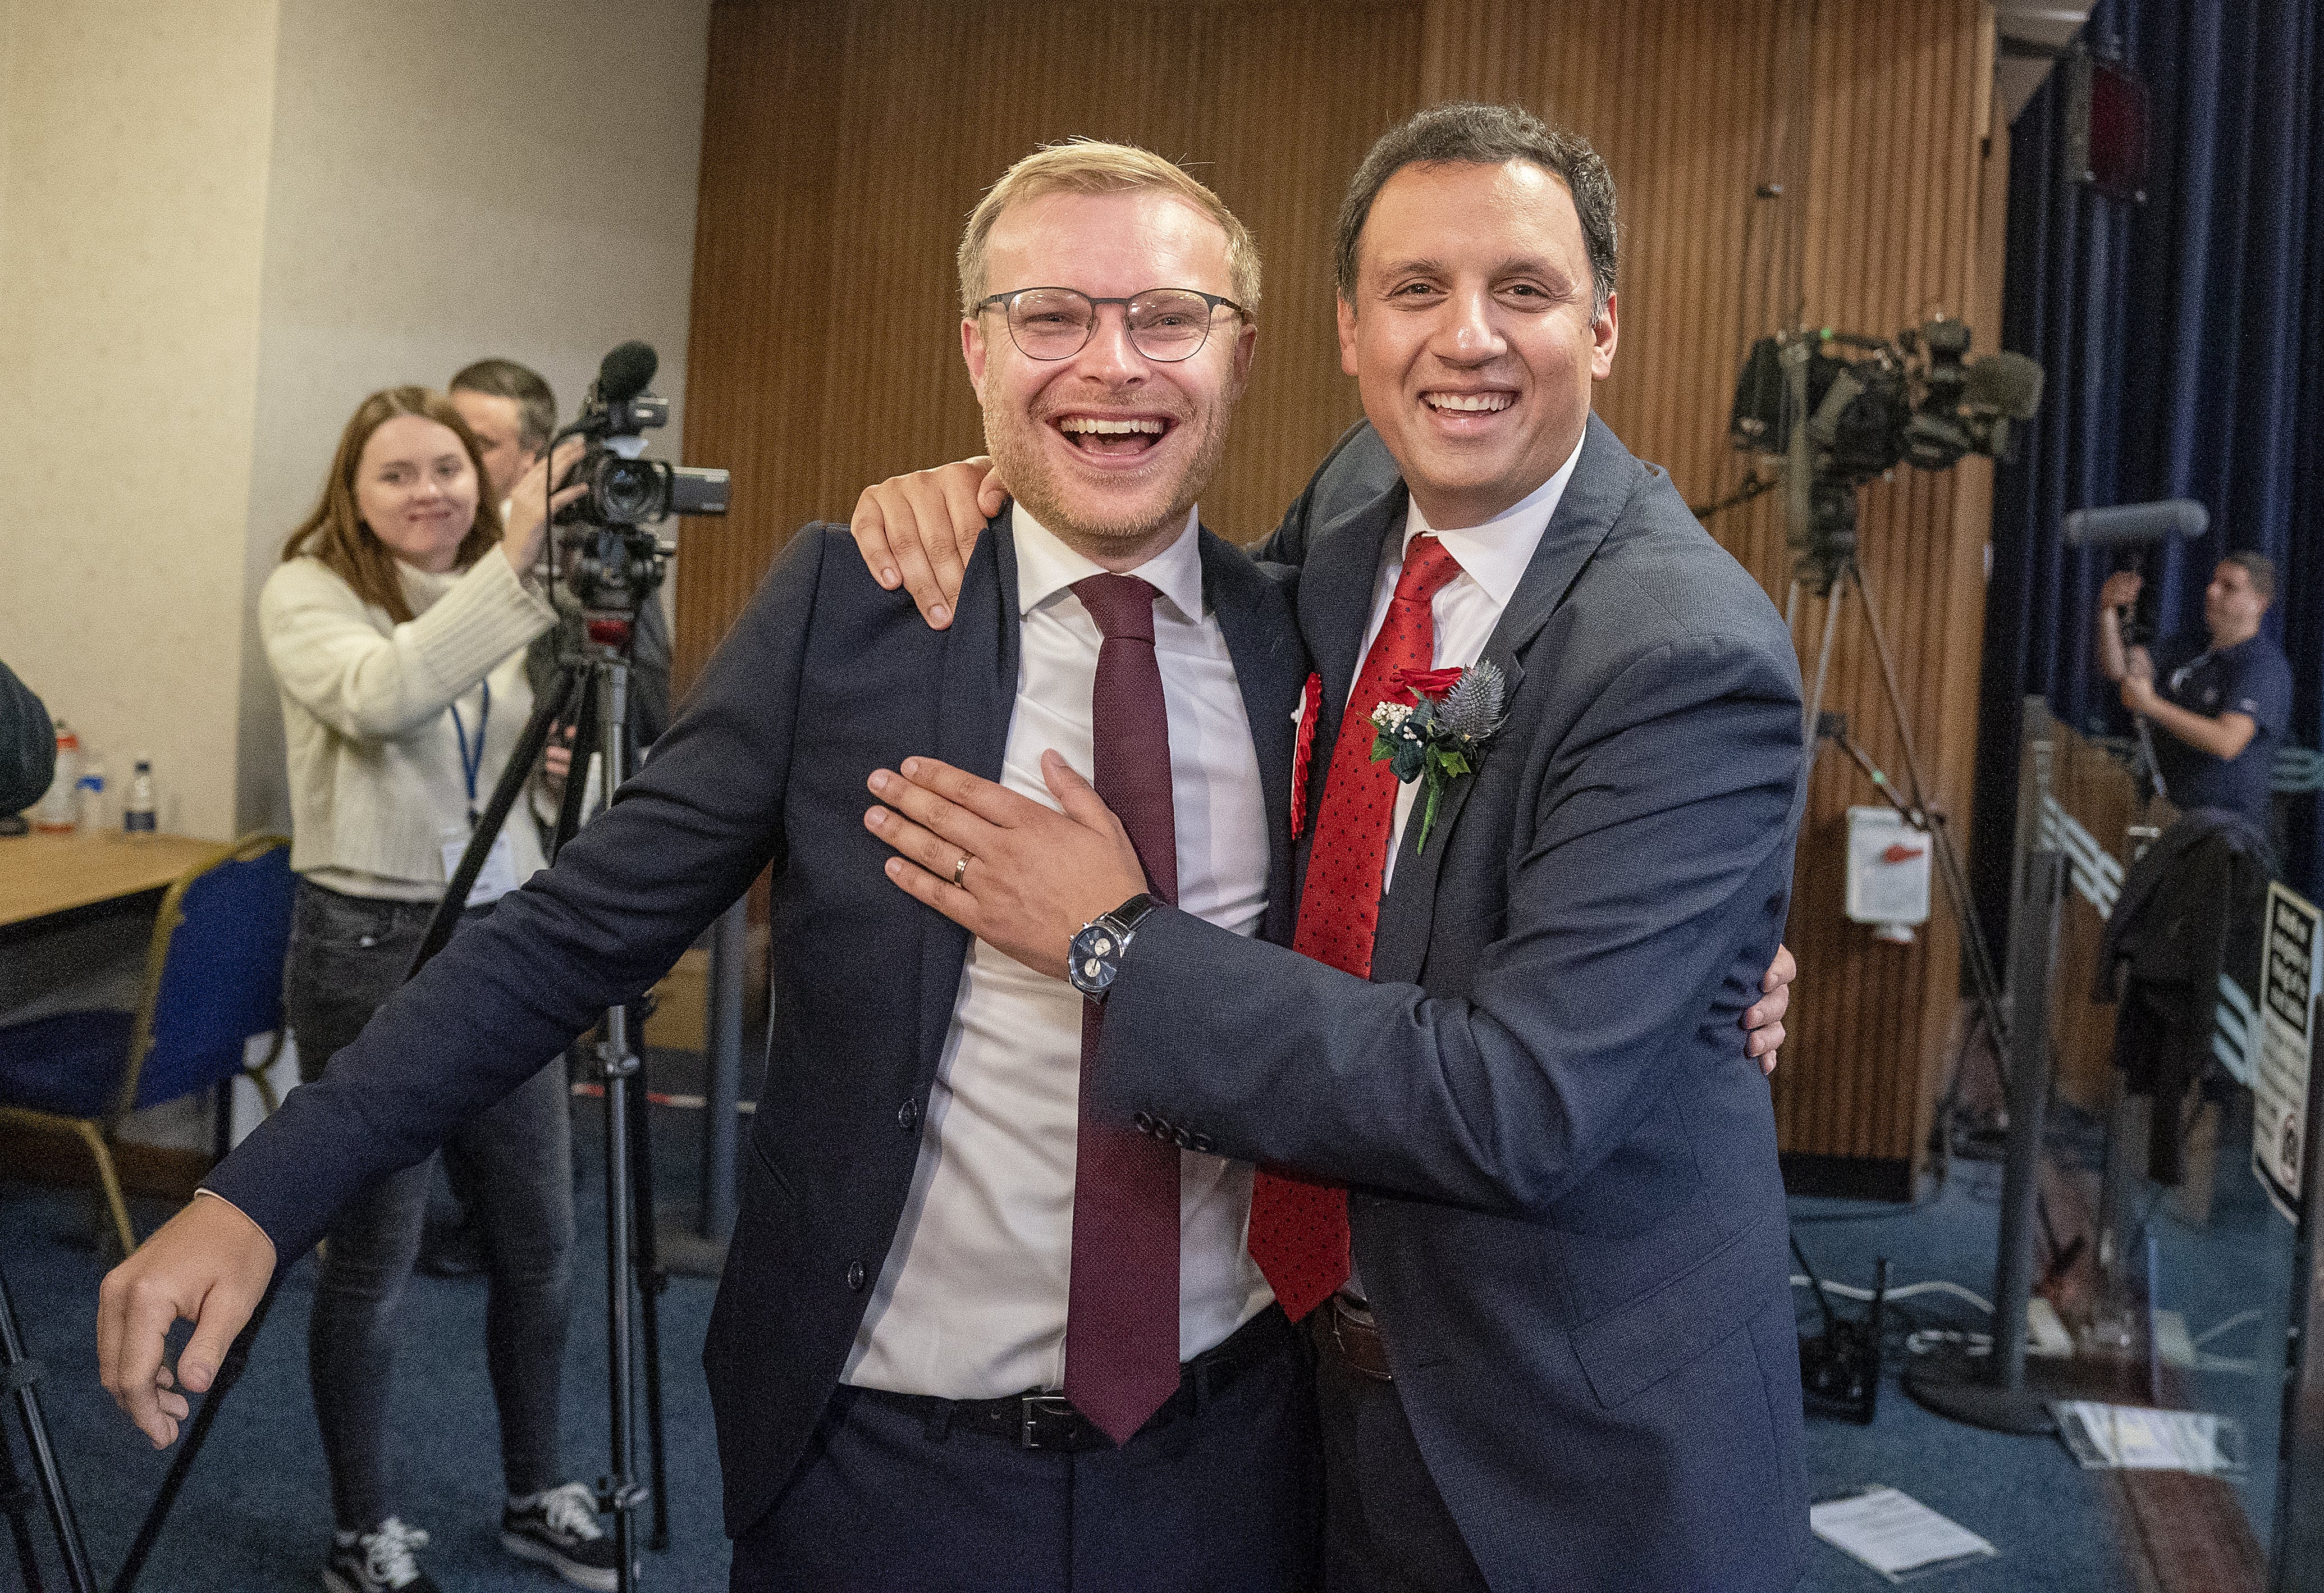 Scottish Labour leader Anas Sarwar with candidate Michael Shanks after Labour won the Rutherglen and Hamilton West by-election, at South Lanarkshire Council Headquarters in Hamilton.